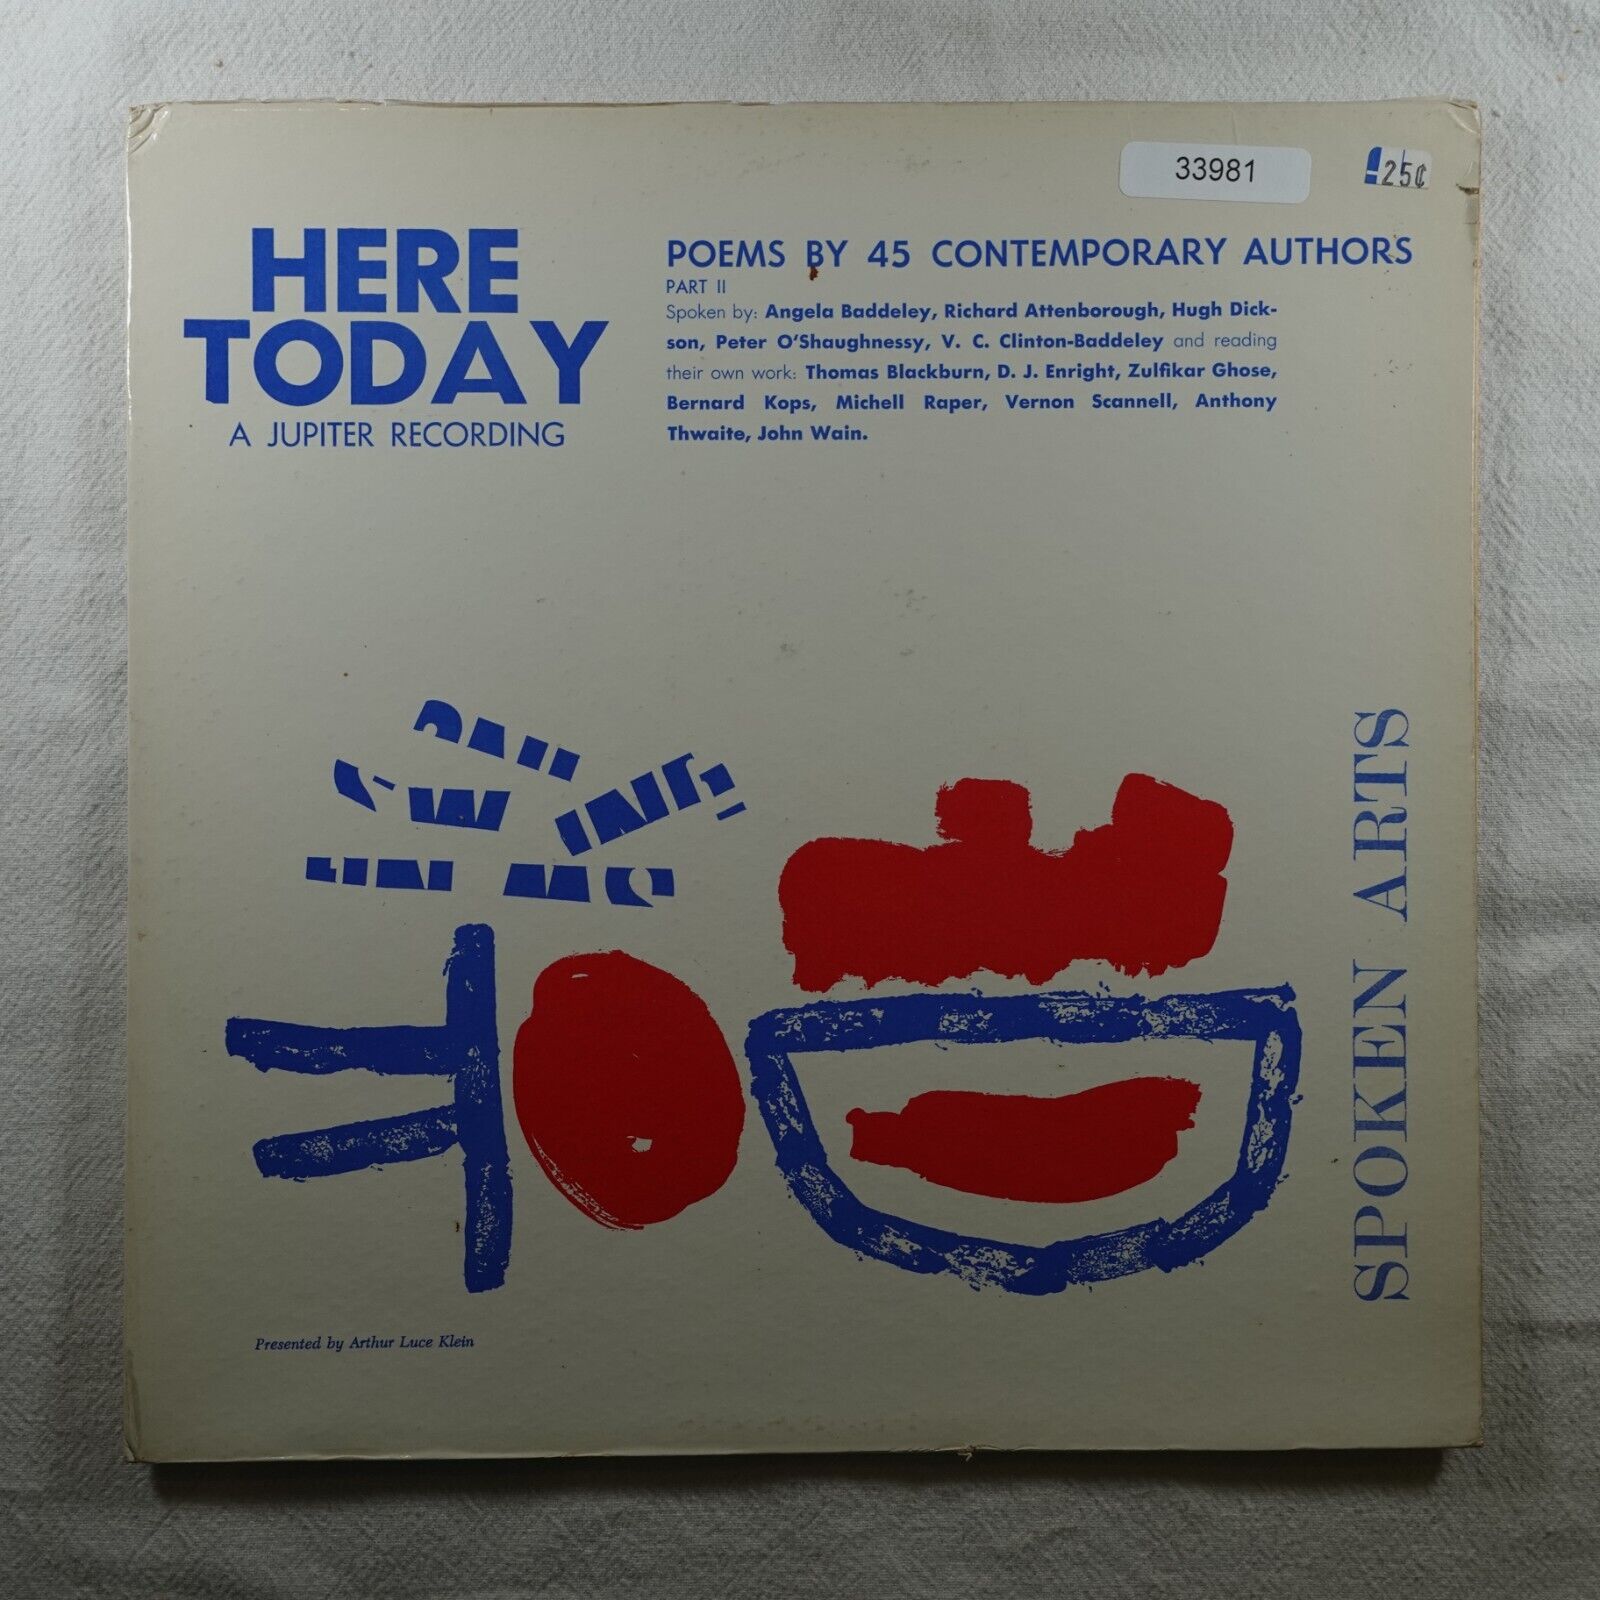 Here Today Poems By 45 Contemporary Authors LP Vinyl Record Album